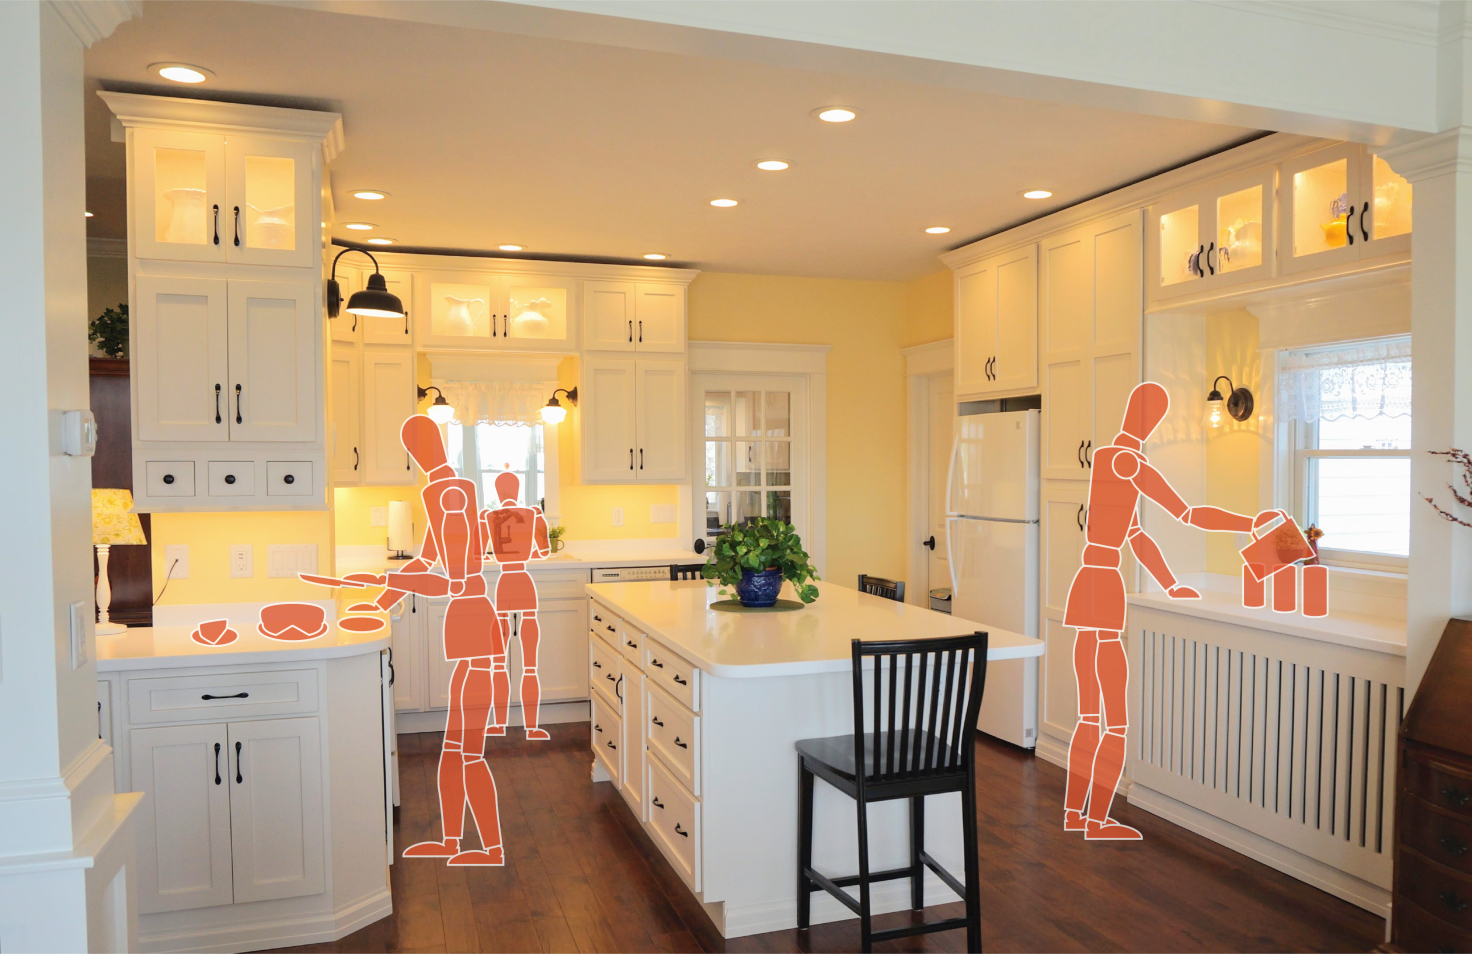 A brightly lit modern kitchen with drawings of three people doing various tasks in it